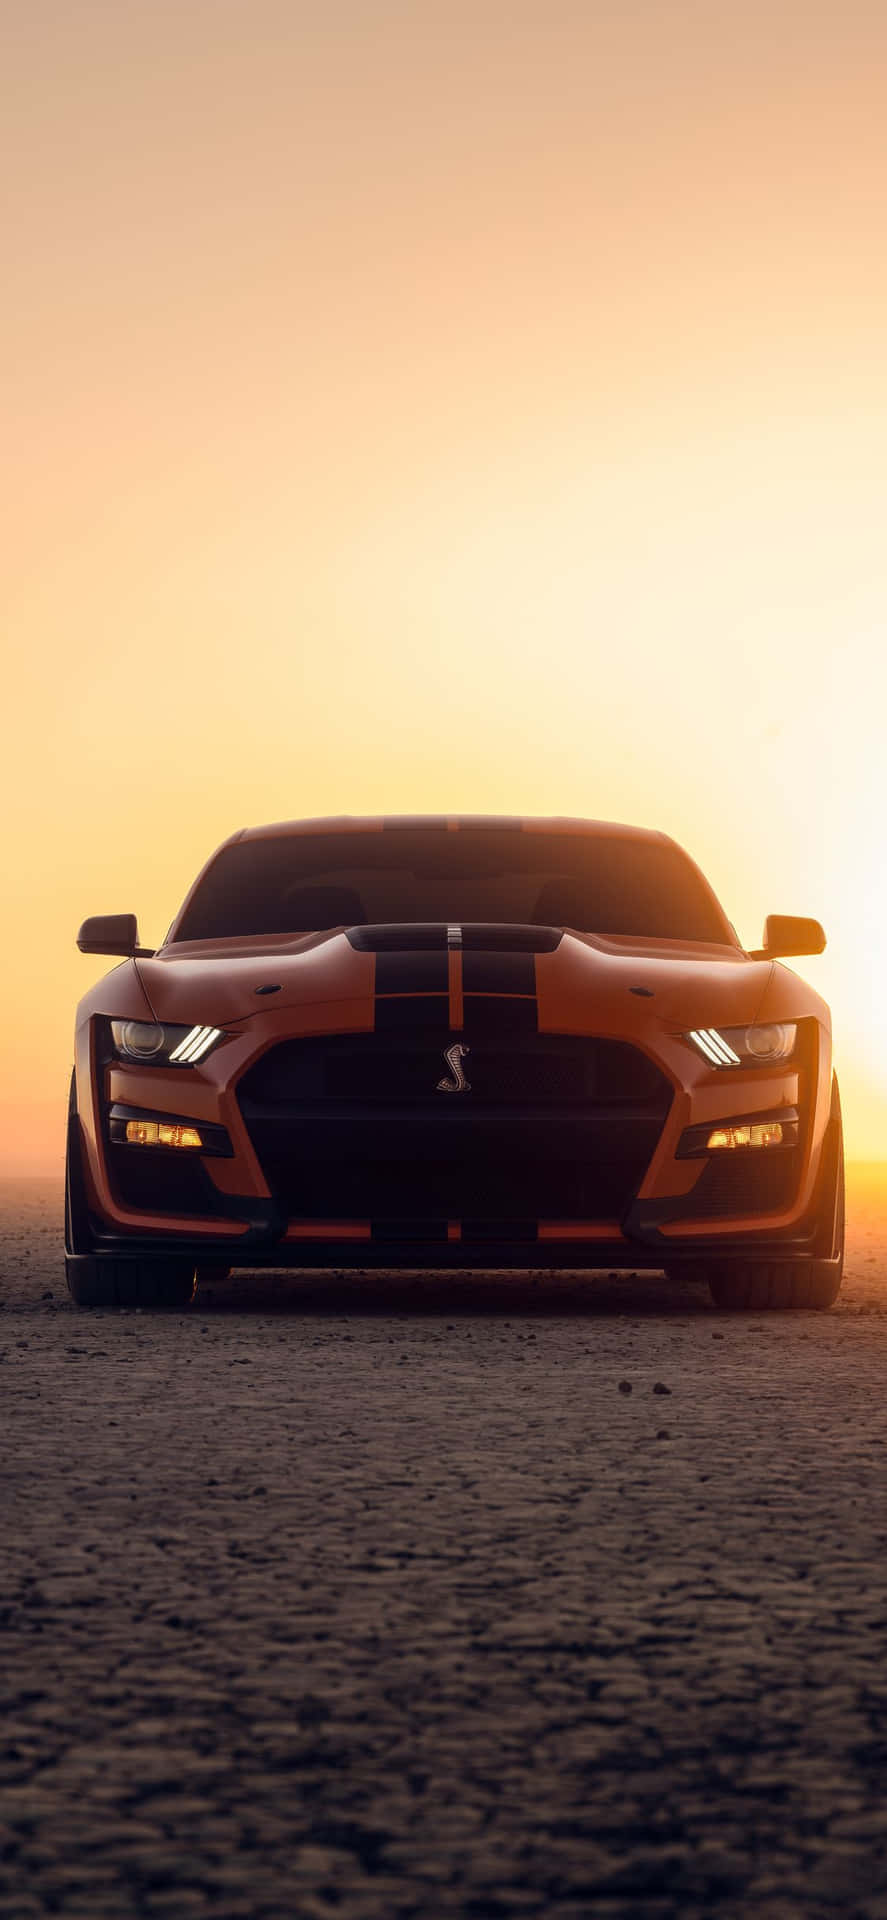 A Ford Mustang Gt Is Sitting In The Desert At Sunset Wallpaper